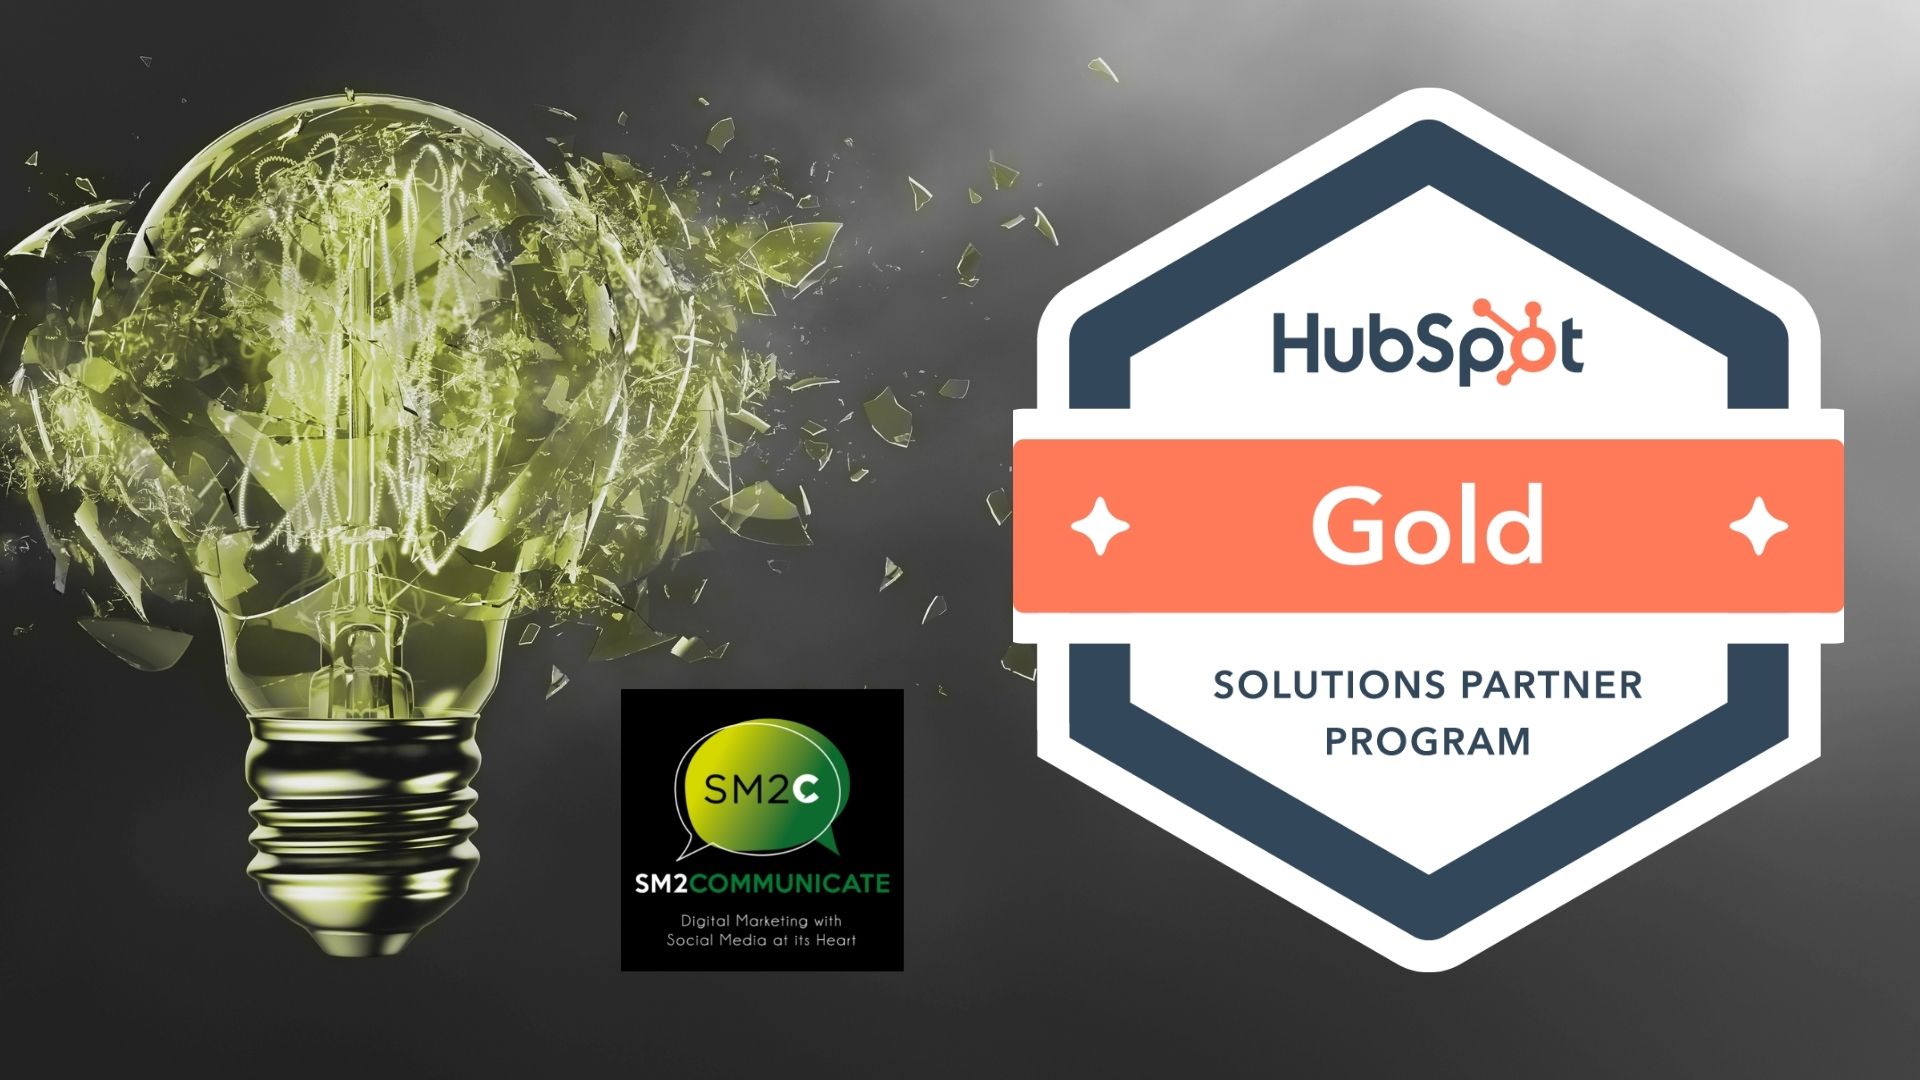 SM2Communicate Achieves Gold Partner Status with HubSpot